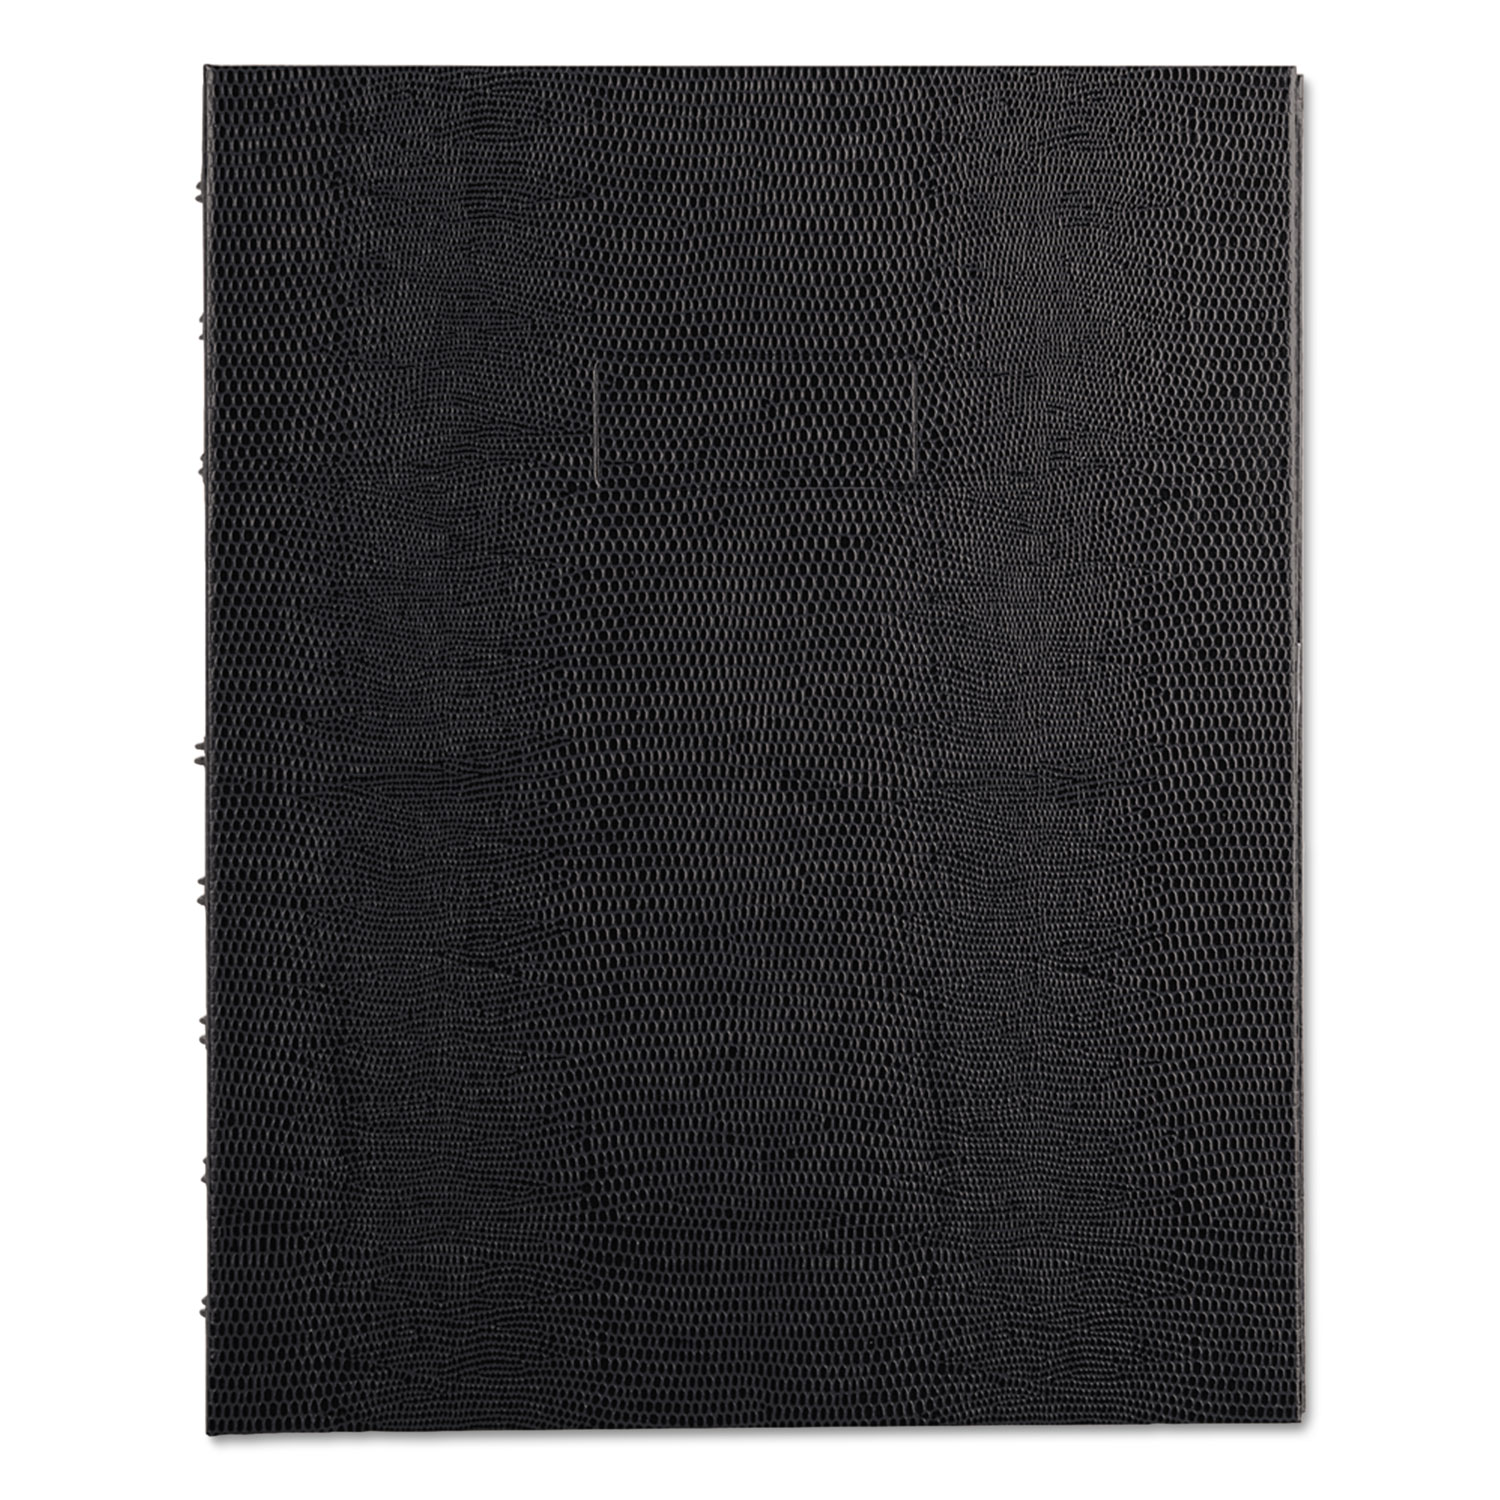 MiracleBind Notebook, College/Margin, 9 1/4 x 7 1/4, Black Cover, 75 Sheets